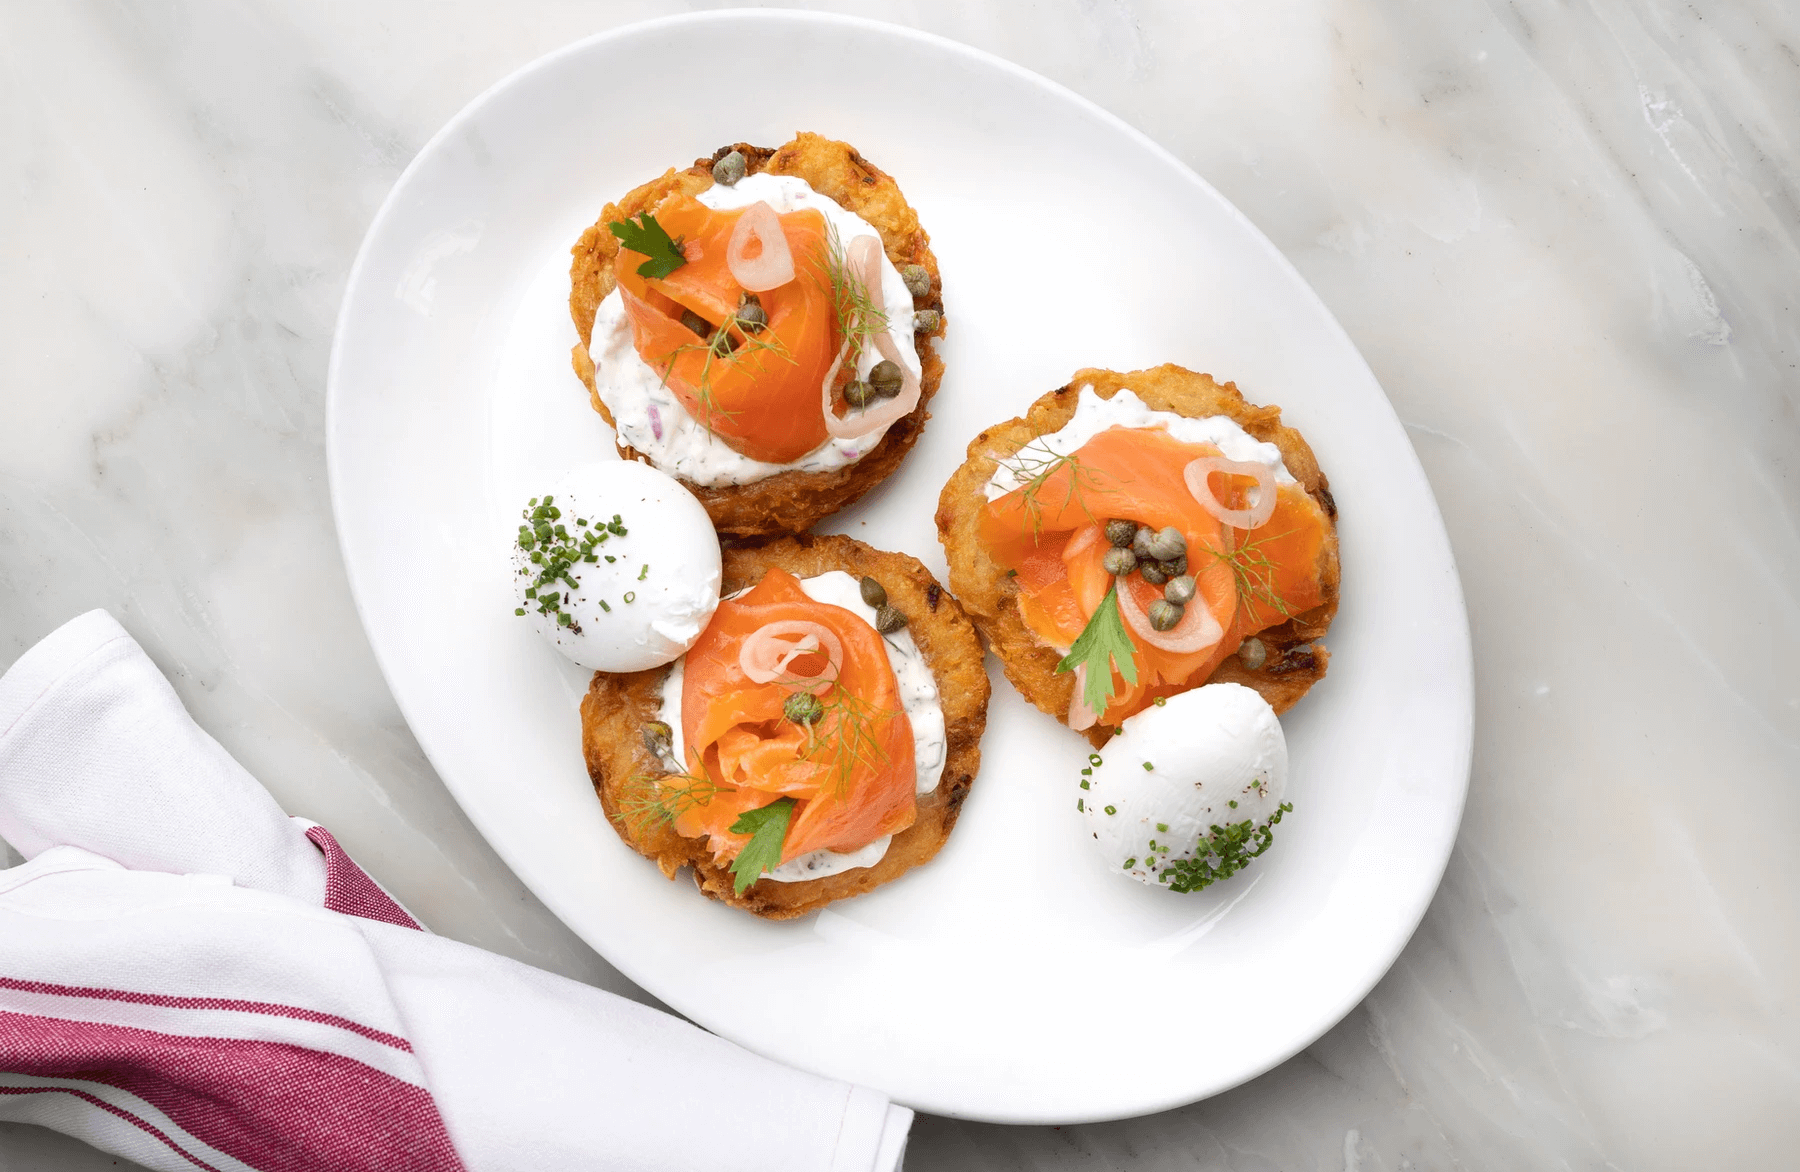 Potato cakes with smoked salmon and cheese on a white plate